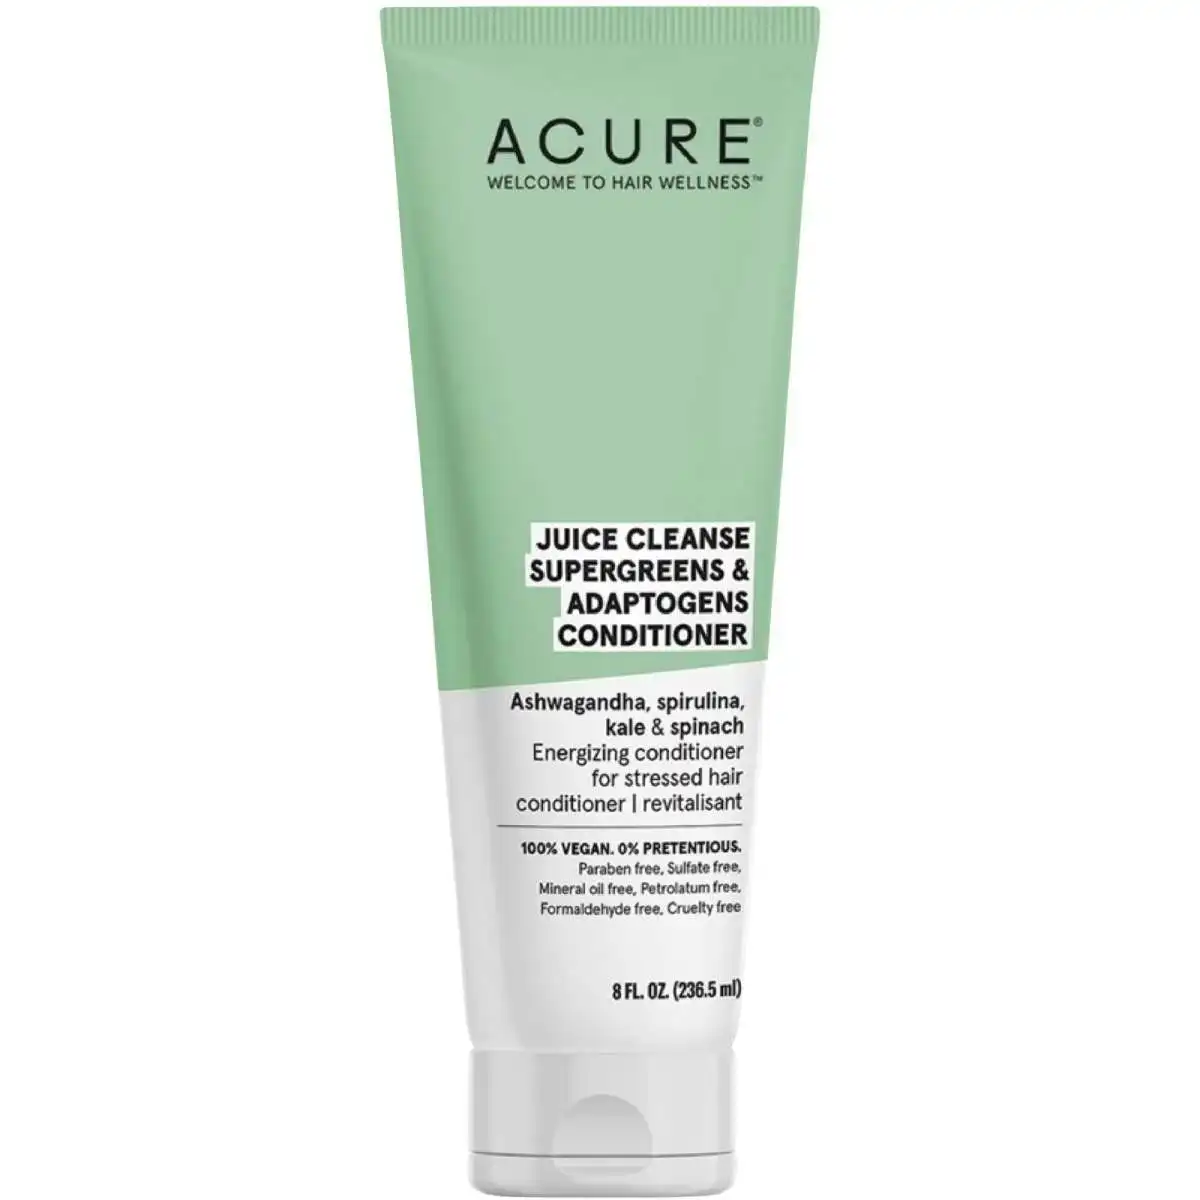 Acure Juice Cleanse S/greens & Adaptogens Conditioner 236ml